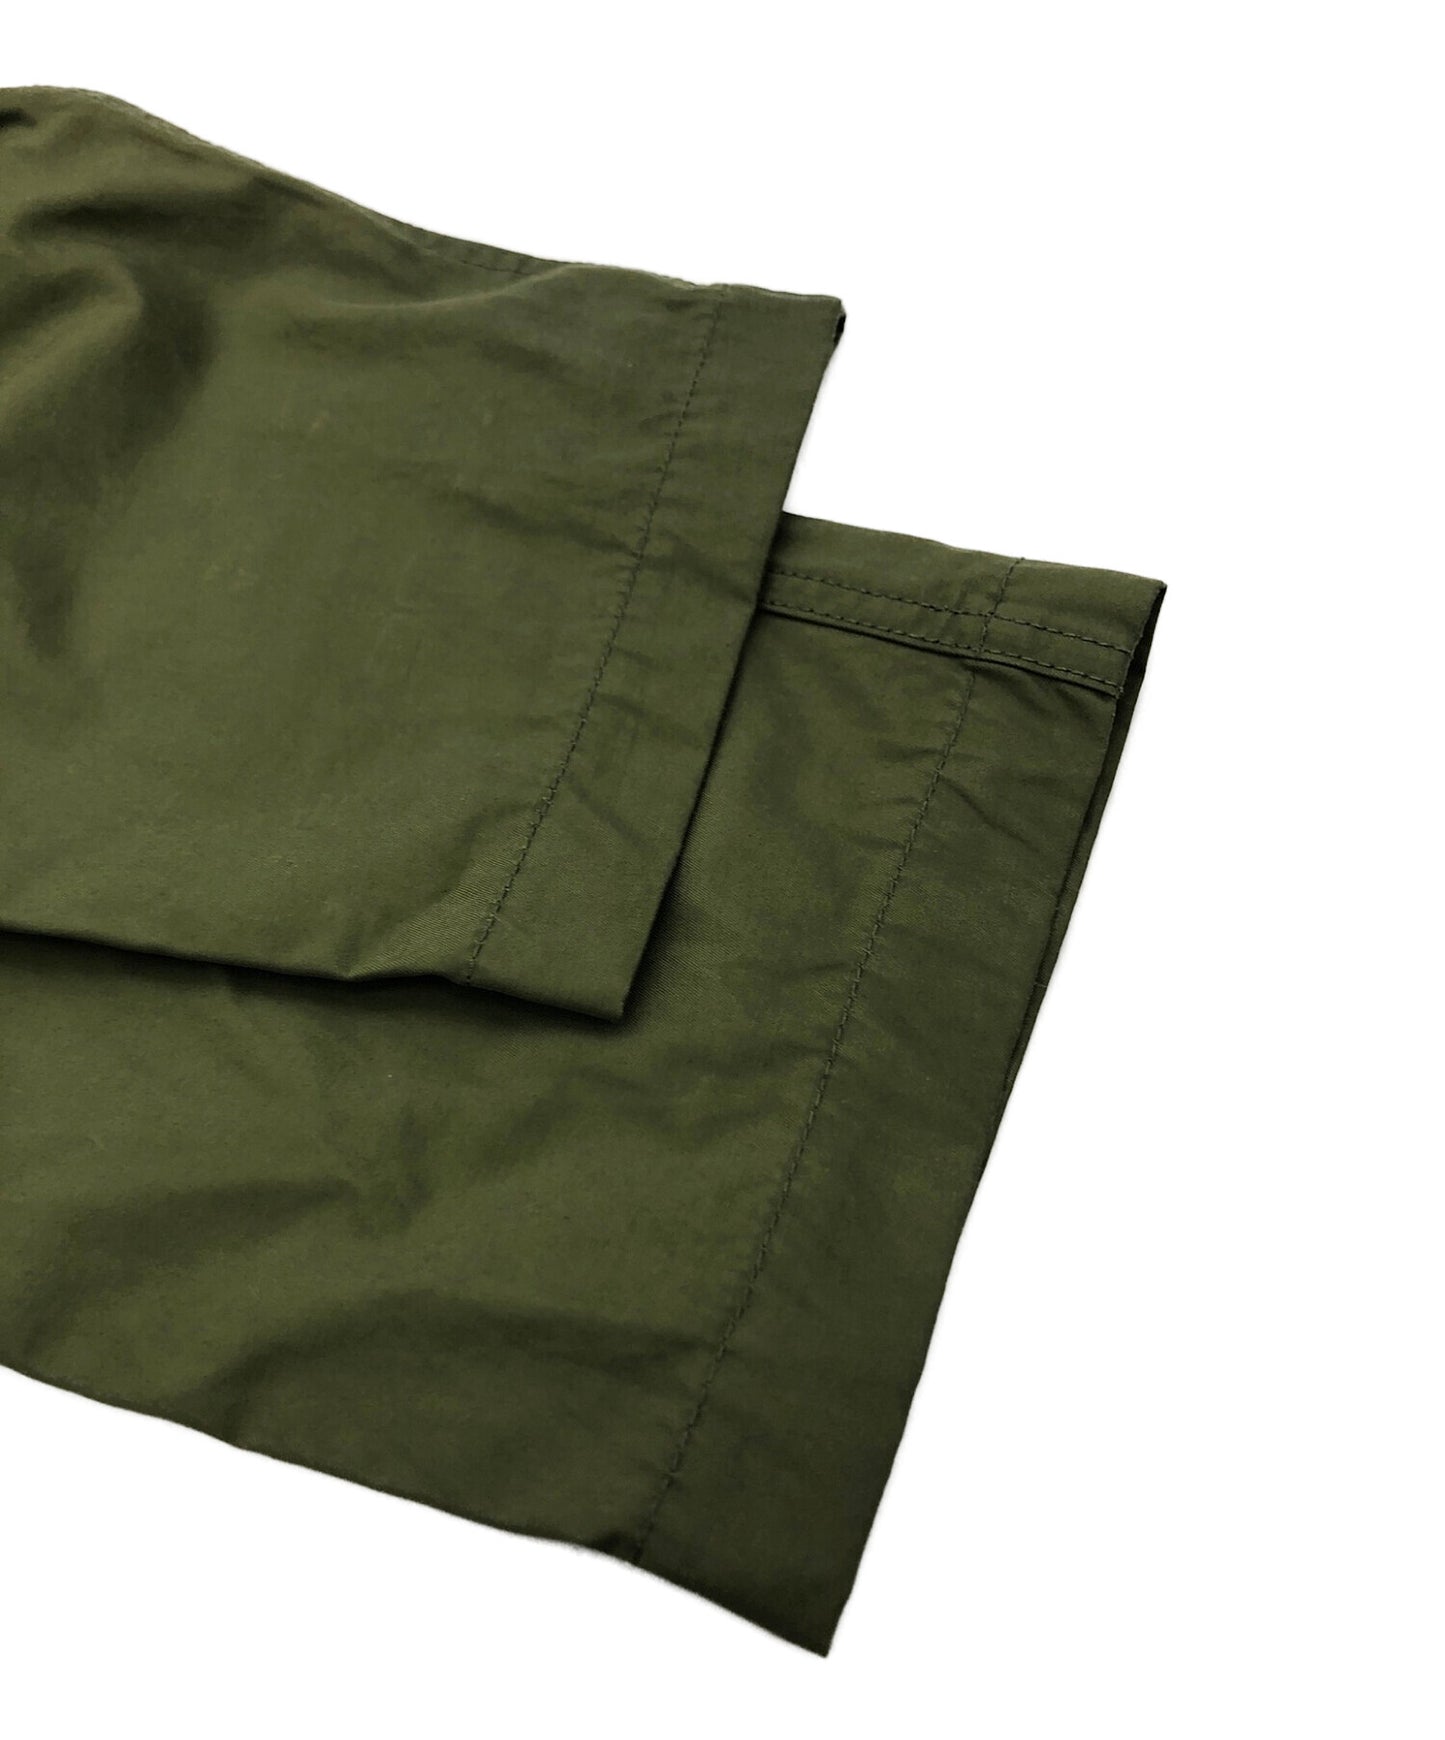 [Pre-owned] JUNYA WATANABE MAN COMME des GARCONS Cotton nylon twill salt shrink water repellent cargo pants WC-P032